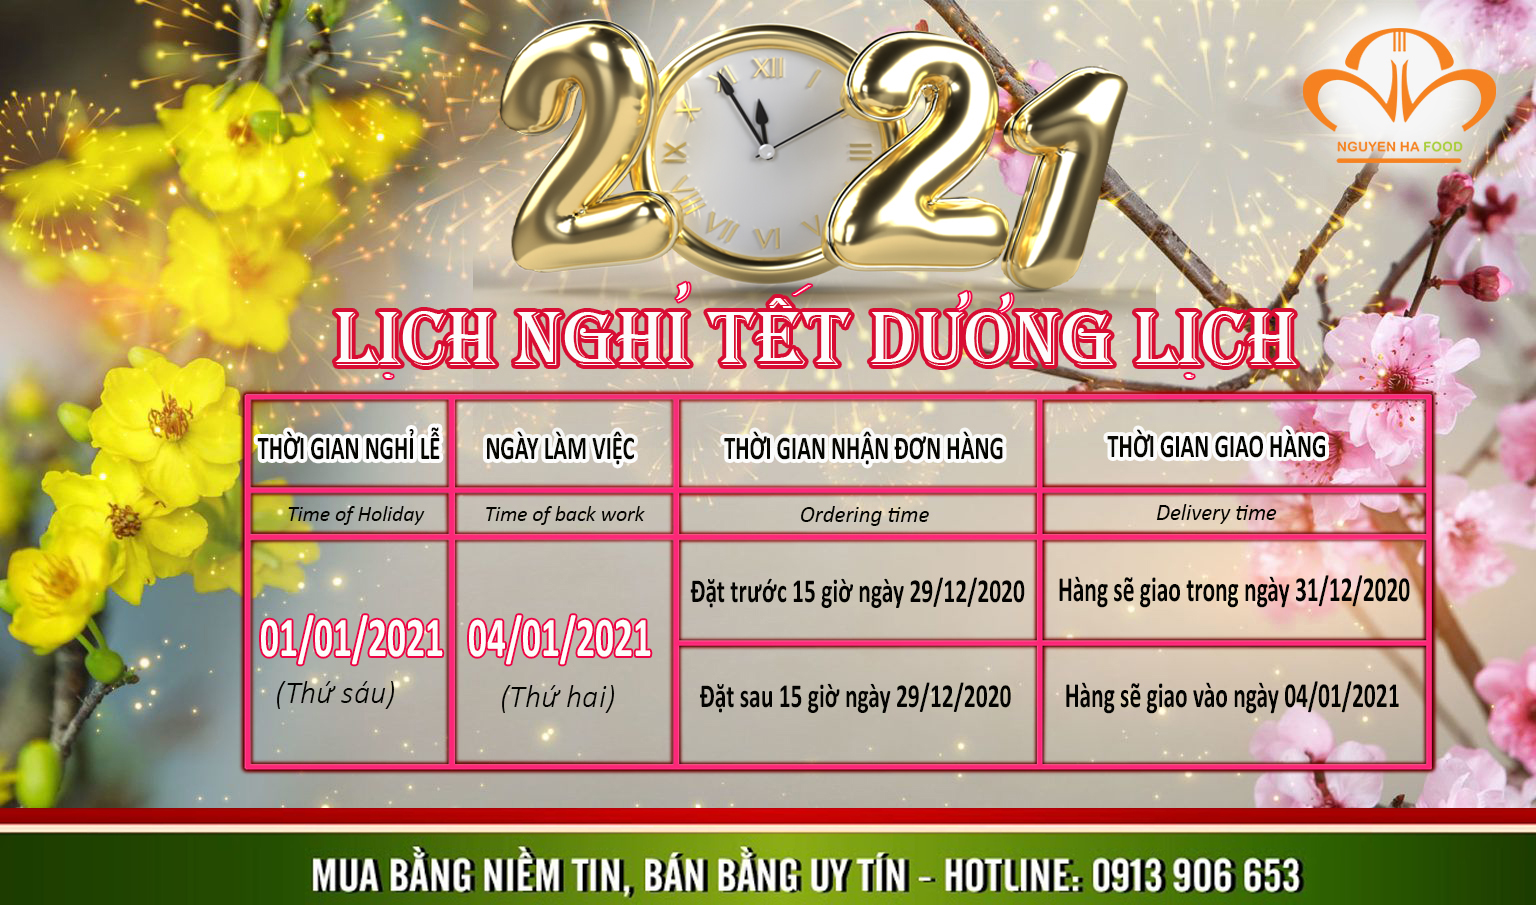 Nd lịch nghie tết duong lịch 2021